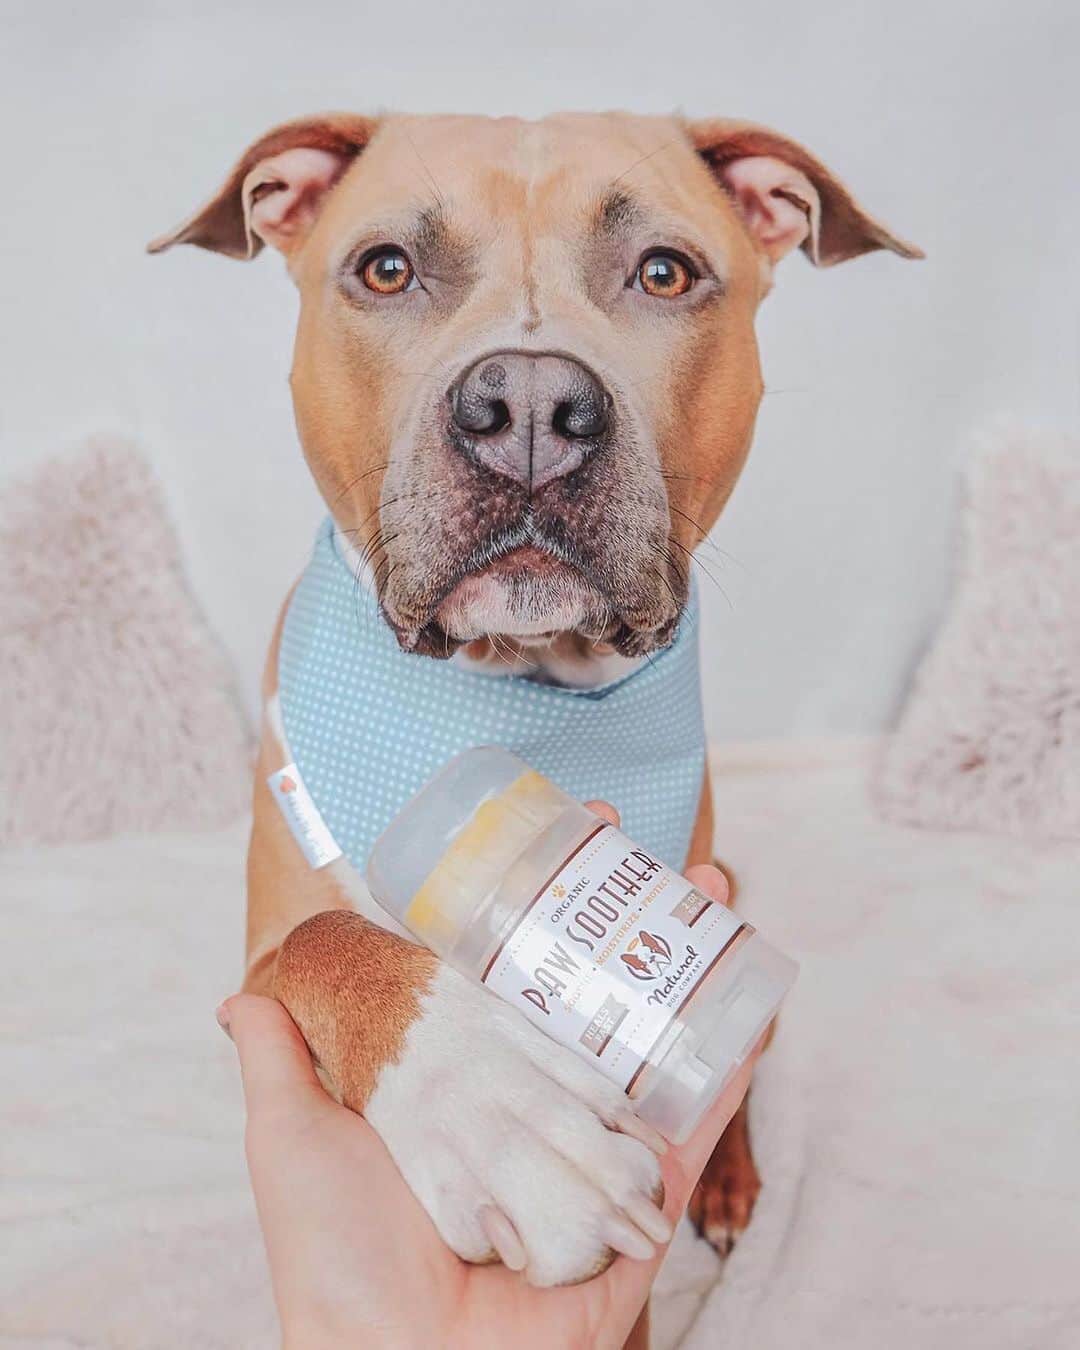 Pit Bull - Fansのインスタグラム：「Paws health is more important than people think, especially when paw pads become overly dry and cracked. #PawSoother is a great all-natural healing balm that works fast to condition and mend dry, chapped paw pads. Completely pet safe and perfect for keeping paws healthy all year long. . ⭐ SAVE 20% off @naturaldogcompany with code PITFANS at NaturalDog.com ▪️ worldwide shipping ▪️ ad 📷: @baileytheamstaffpuppy」